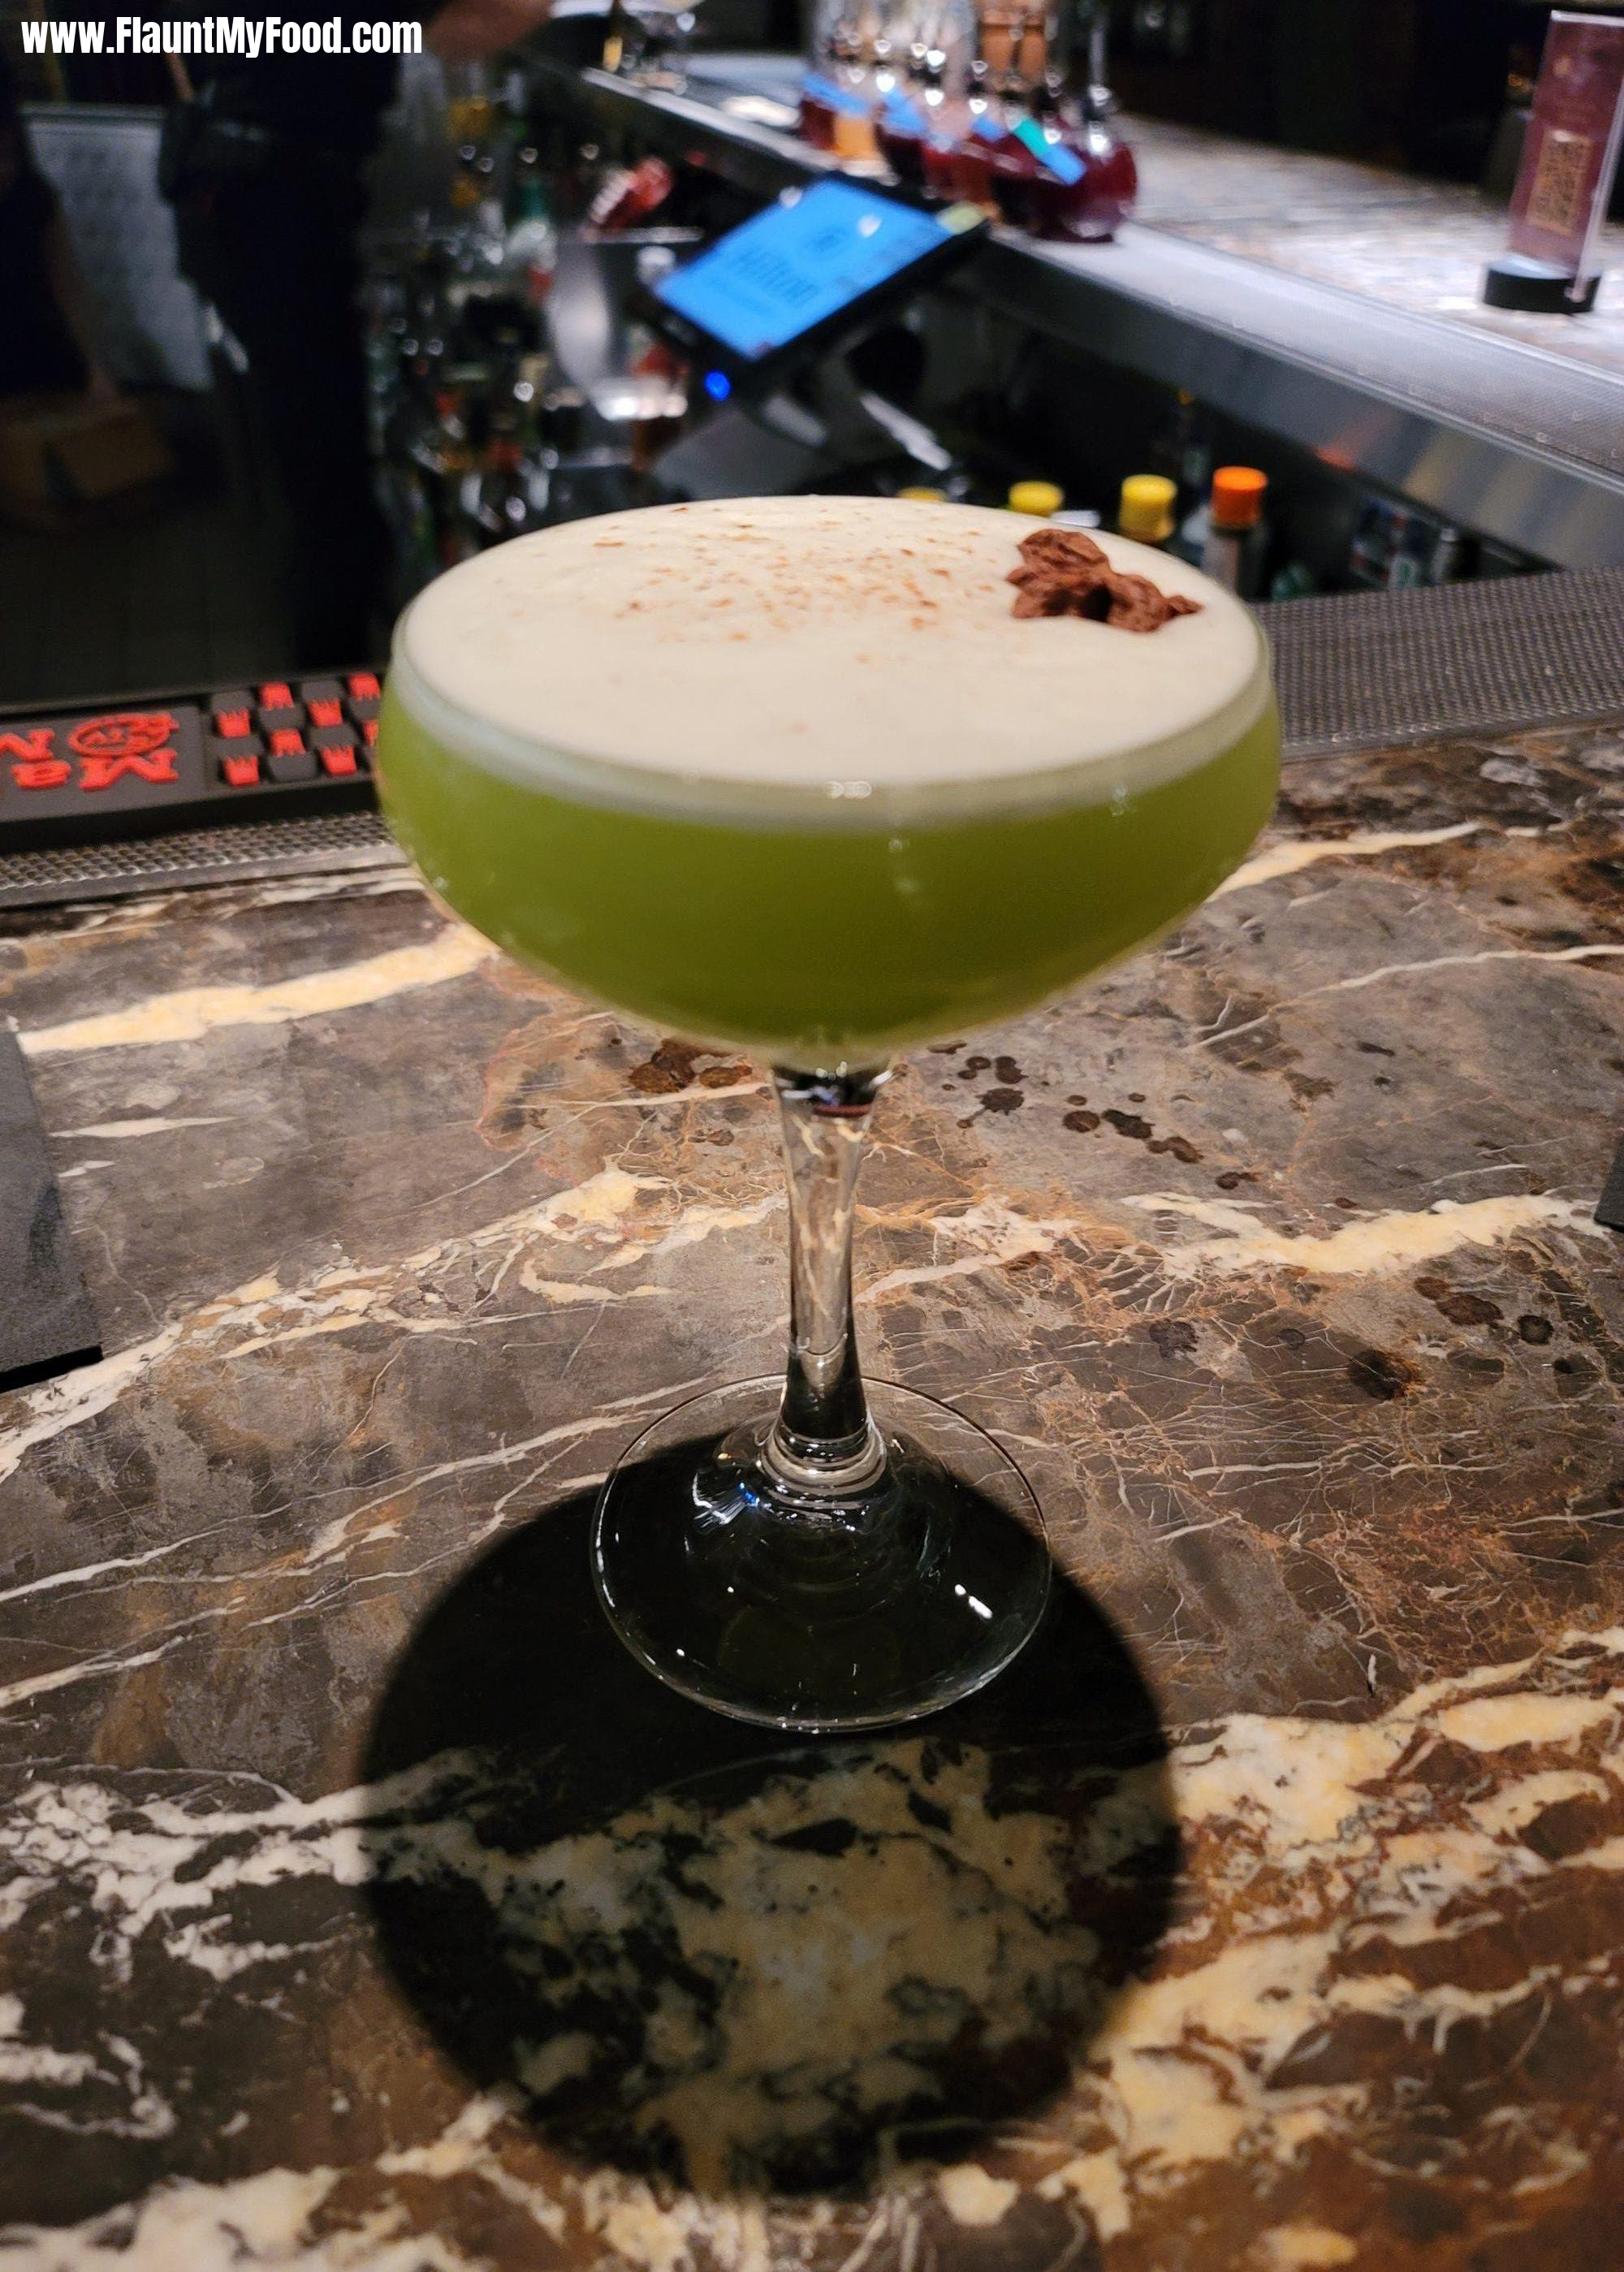 Bourbon and Banter - Dallas, TXTHE GREMLIN made with SipSmith Gin, Dekuyper Melon Liquer, lemon juice, Green Chartreuse, and egg white.